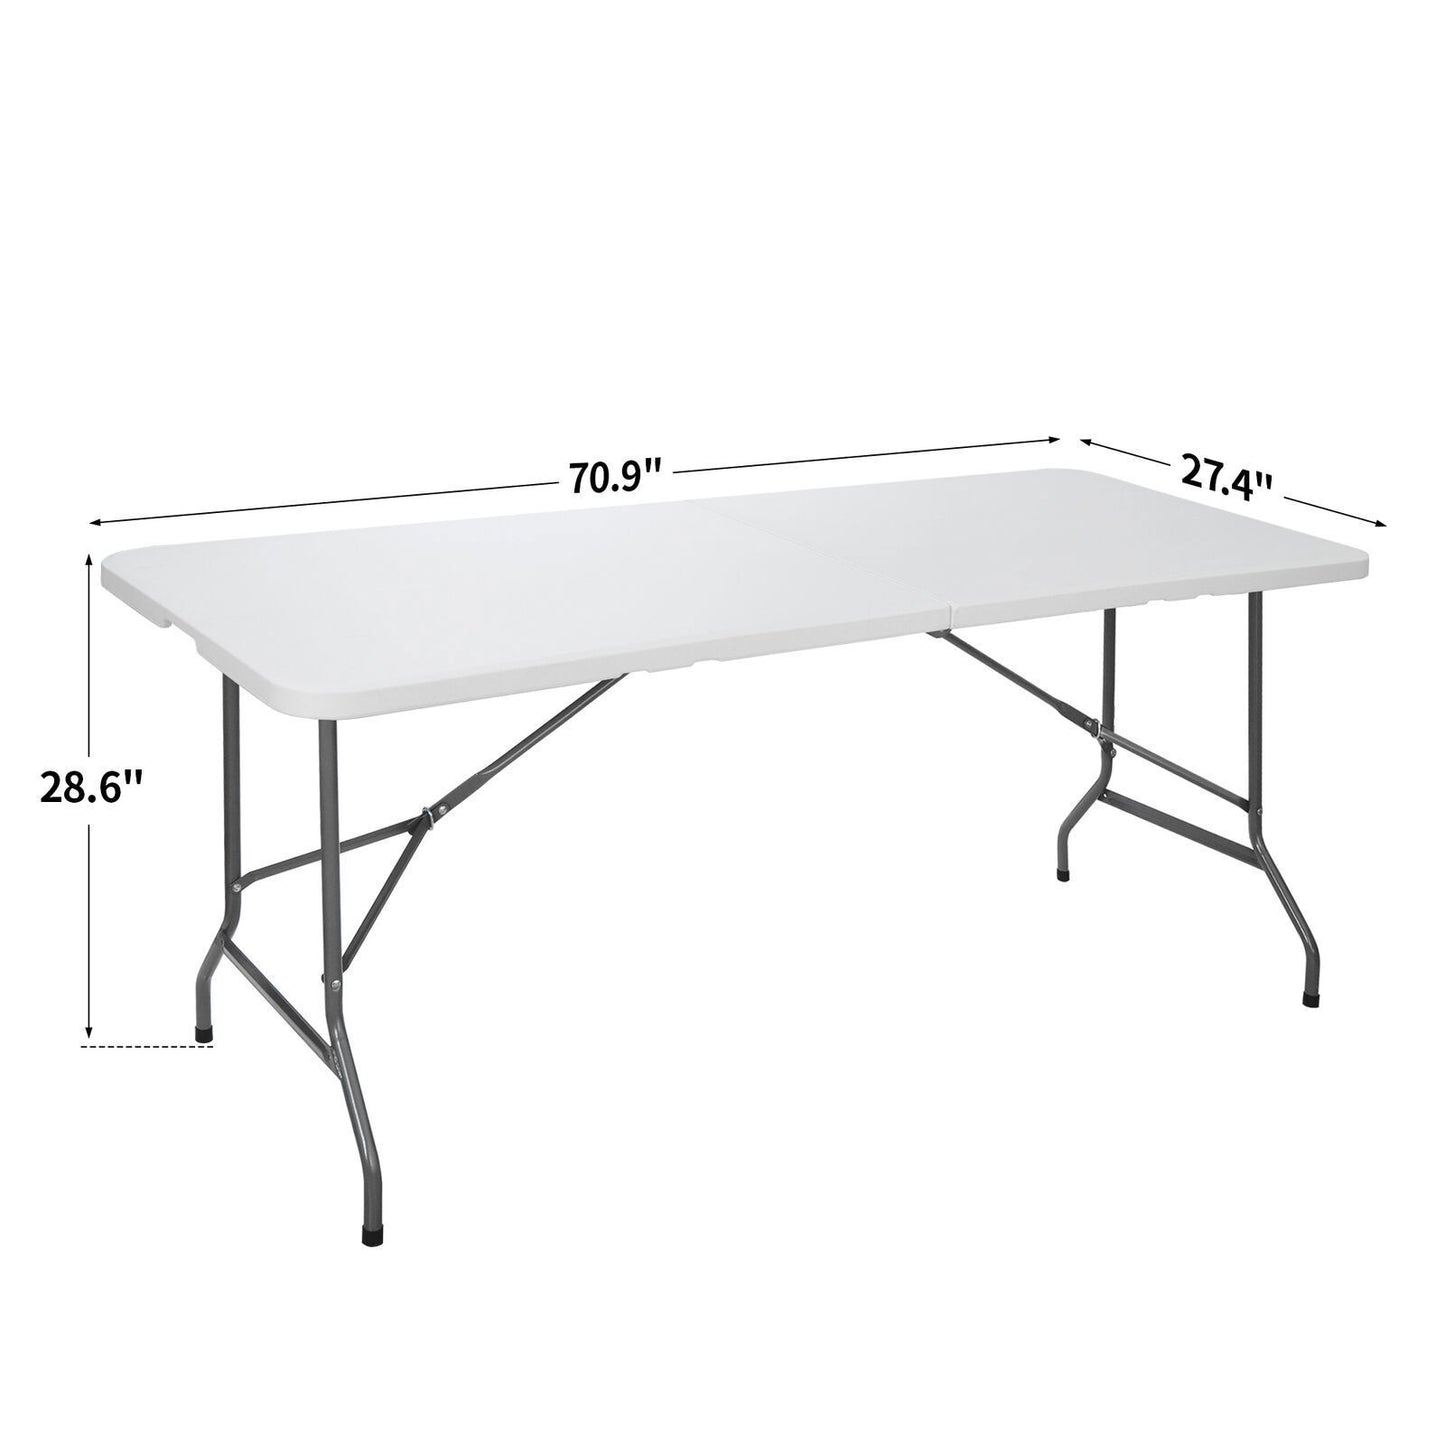 4PCS 6ft Folding Table Portable Indoor Outdoor Picnic Party Camping Tables